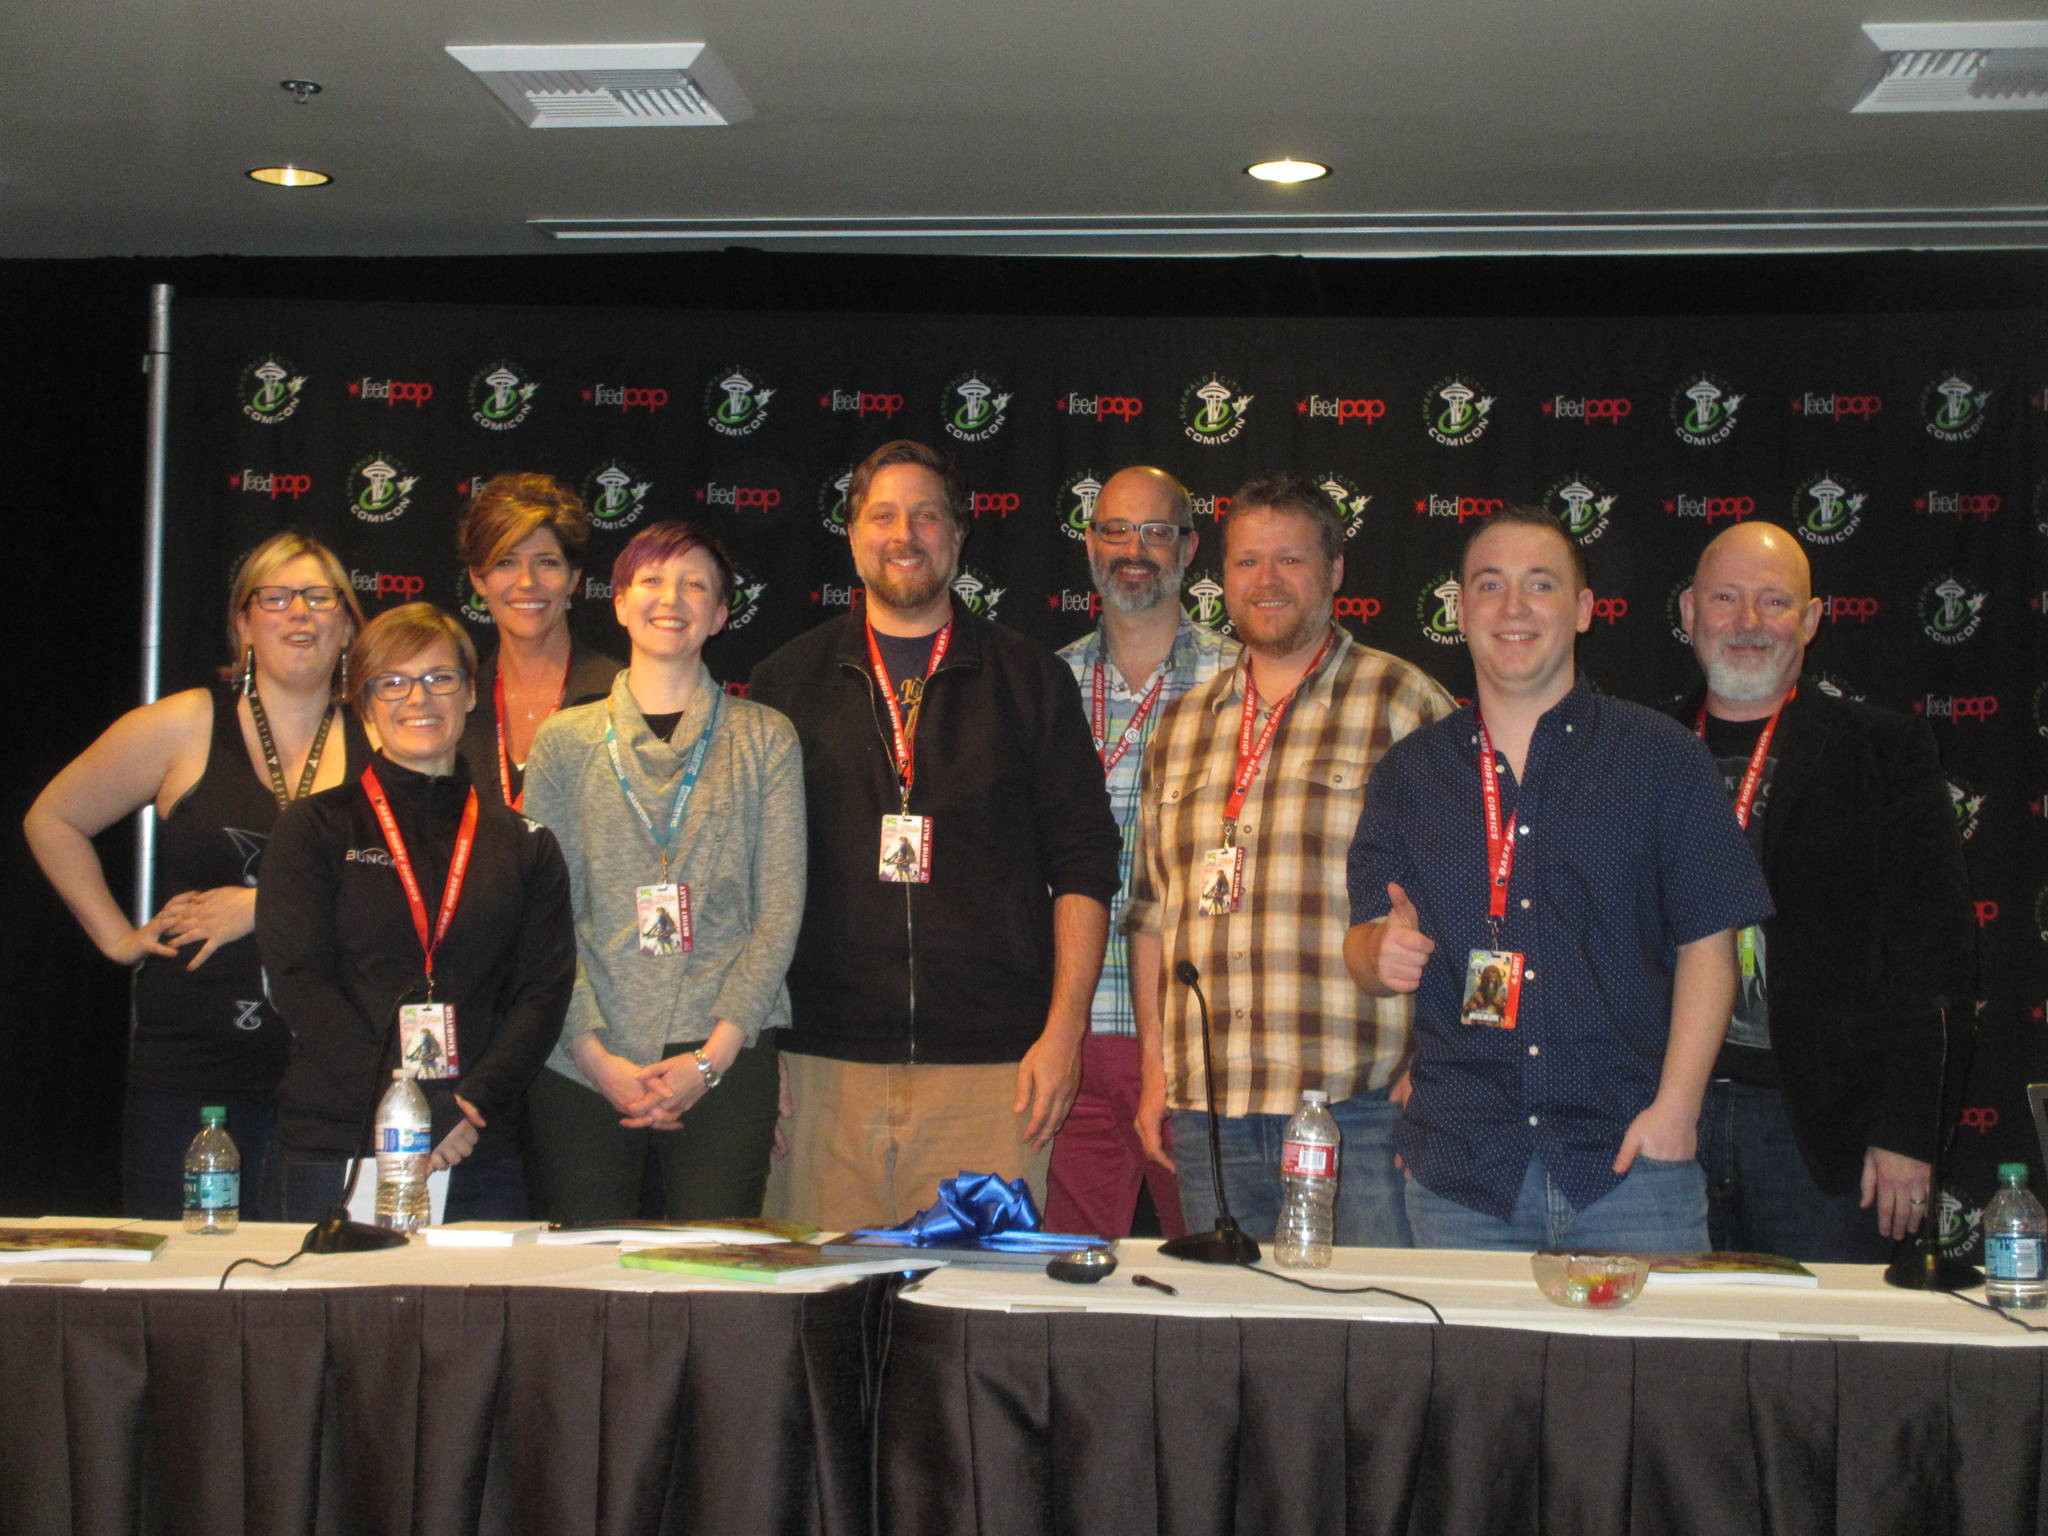 Kirkland resident Noah Ingram (second from right) poses from a photo alongside “Time Wreckers” contributors Zoe Brookes, Christine Edwards, Donna Verretto, Emily Figenschuch, Brett Bean, Chris Sheridan, Ethan Nicolle and Michael Jones on March 4 at Emerald City Comicon. Contributed photo